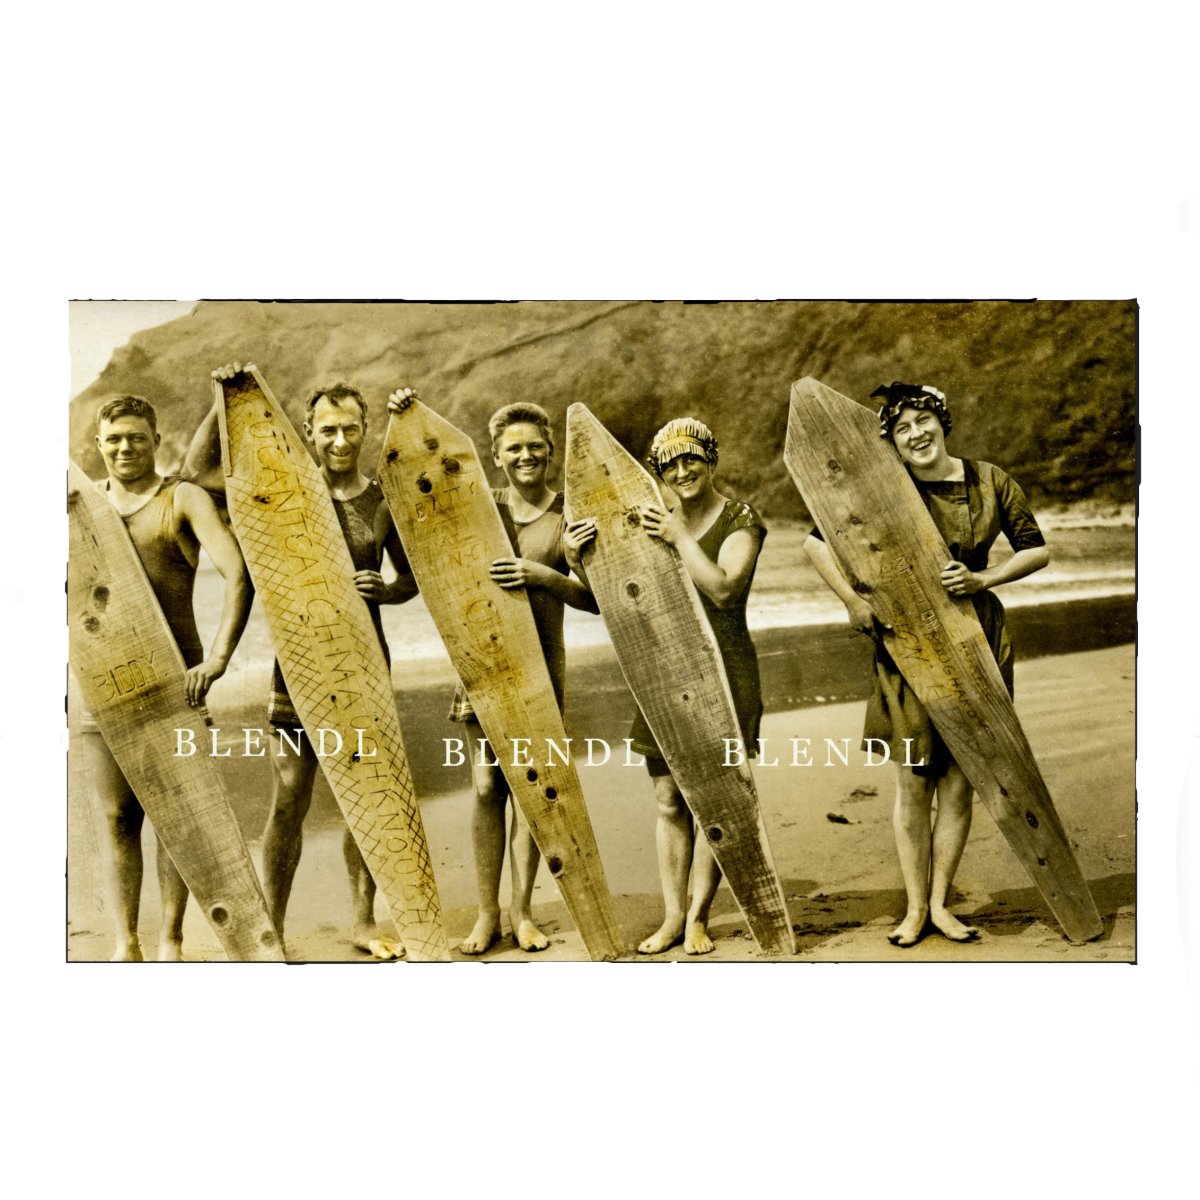 A historical photograph of five surfers and their boards at Oregon's Pacific Coast. Reproduced by Alex Blendl Historic Photos in Portland, Oregon. 